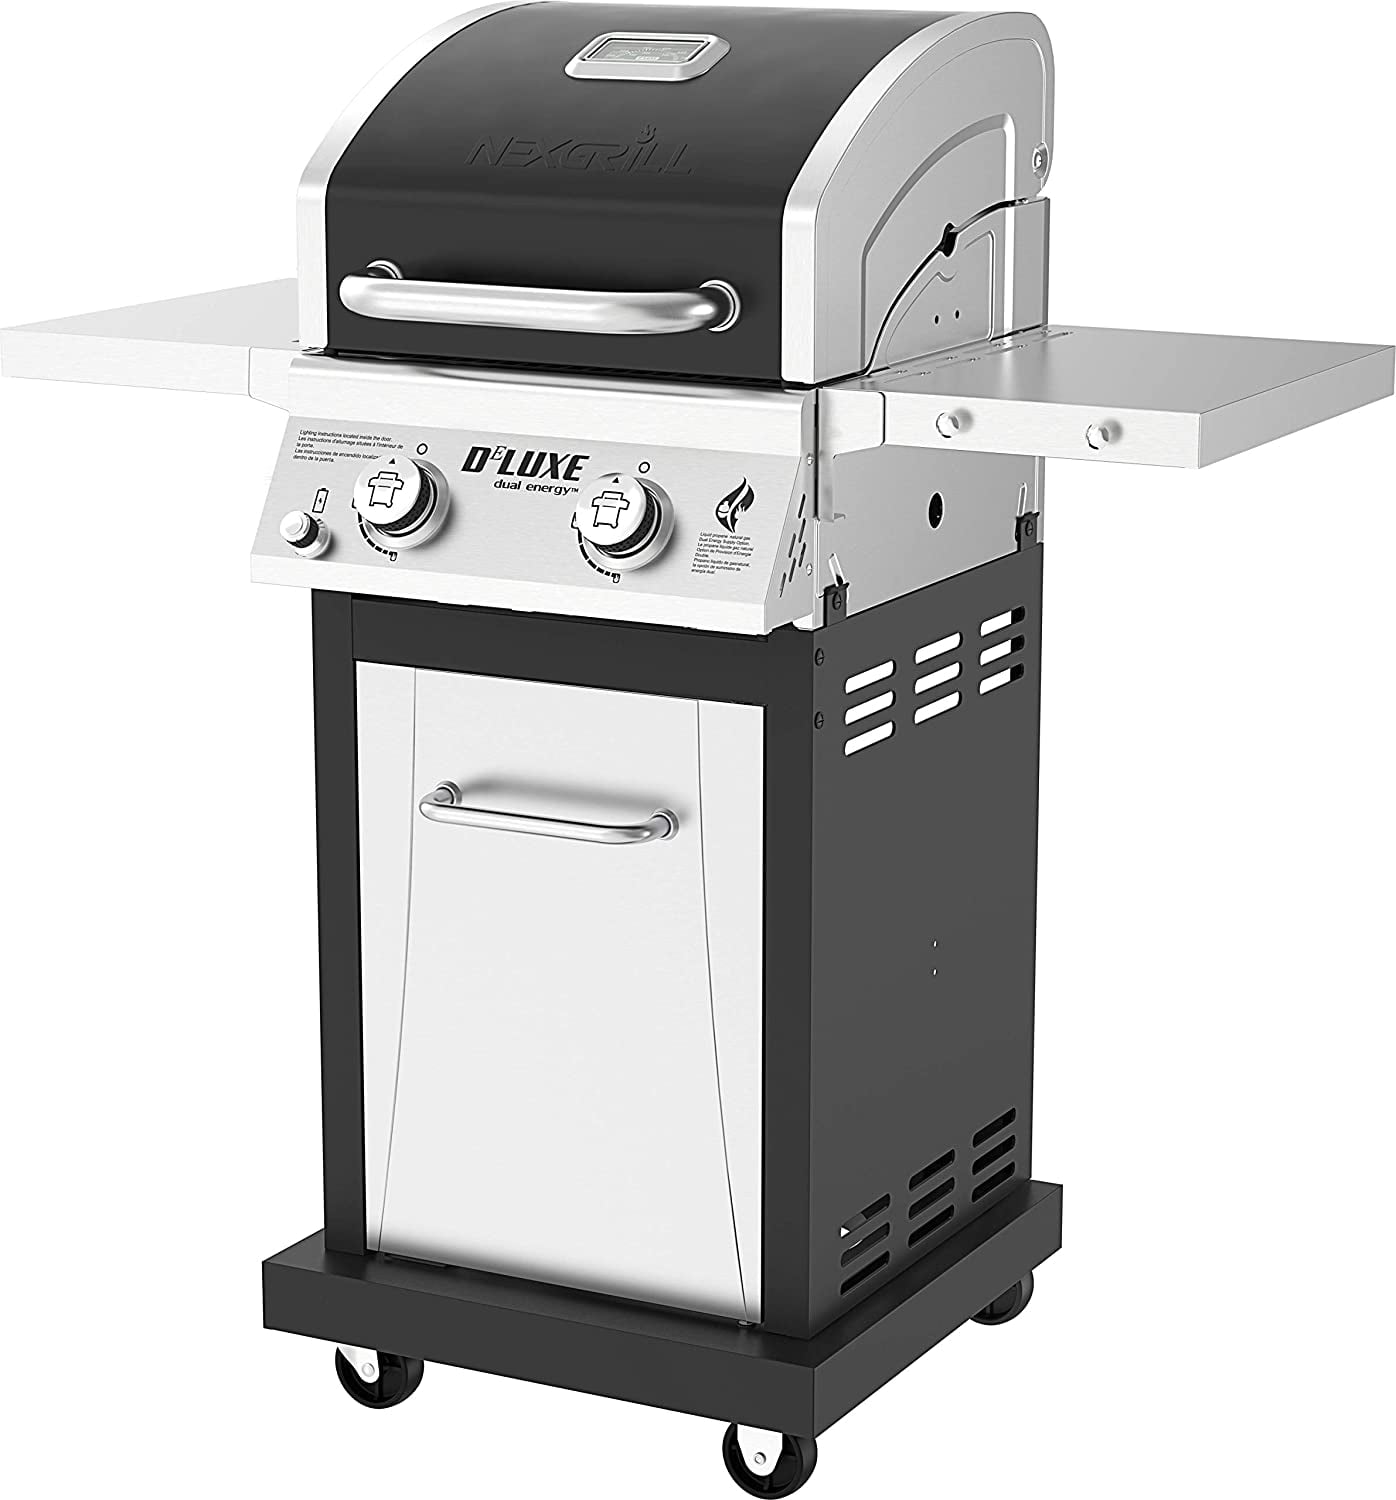 Deluxe 2 Burner Propane Gas Grill, for Outdoor Cooking, Patio, Barbecue Grill with Two Silver and Black - Walmart.com